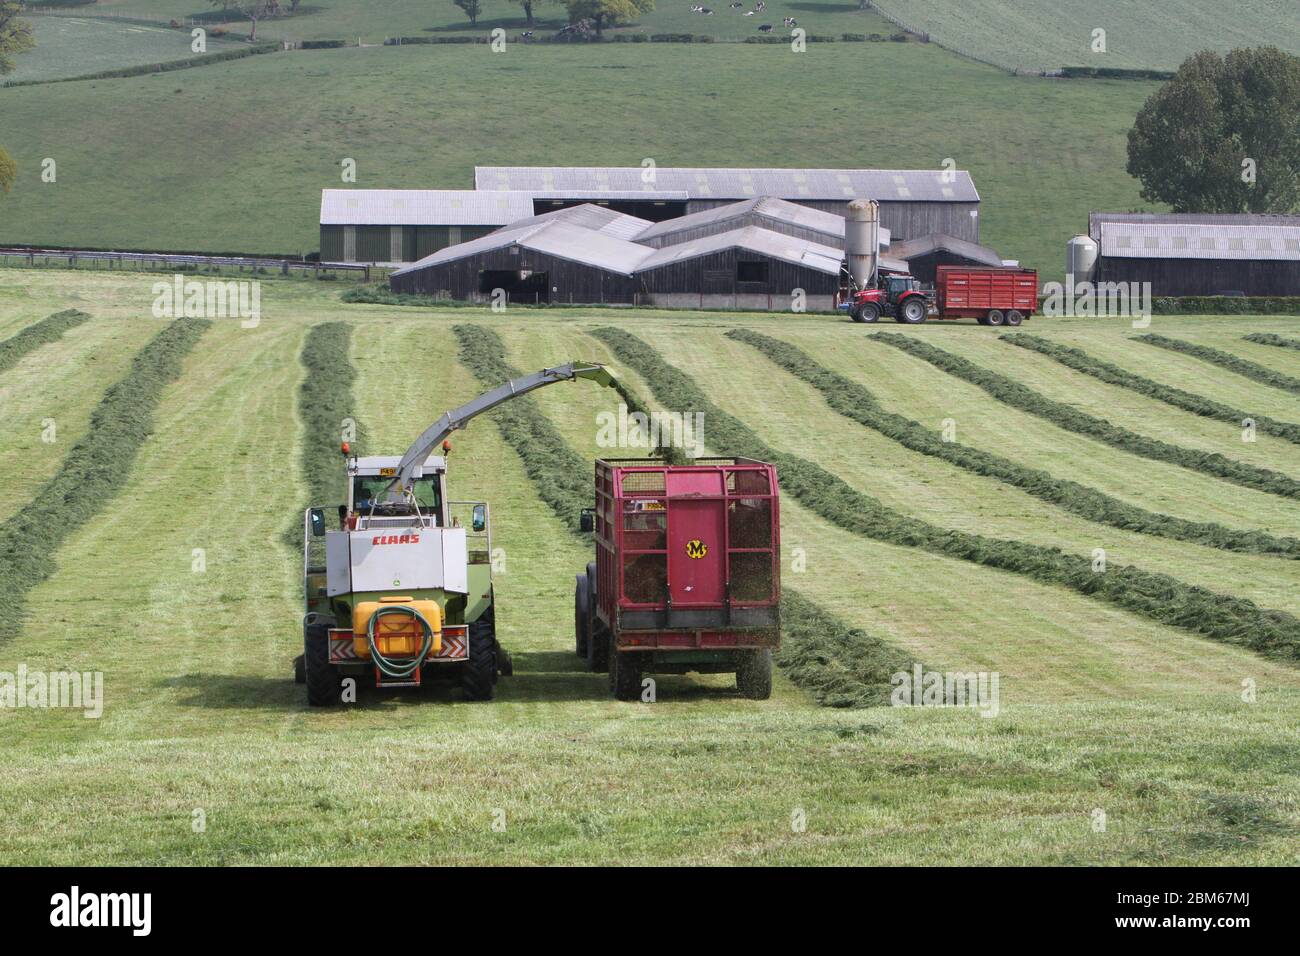 Howardian Hills, Brandsby, North Yorkshire. 7th May 2020. Farmers busy harvesting and collecting silage crop in fine weather across the North of England ahead of the Bank Holiday weekend. Credit: Matt Pennington / Alamy Live News. Stock Photo